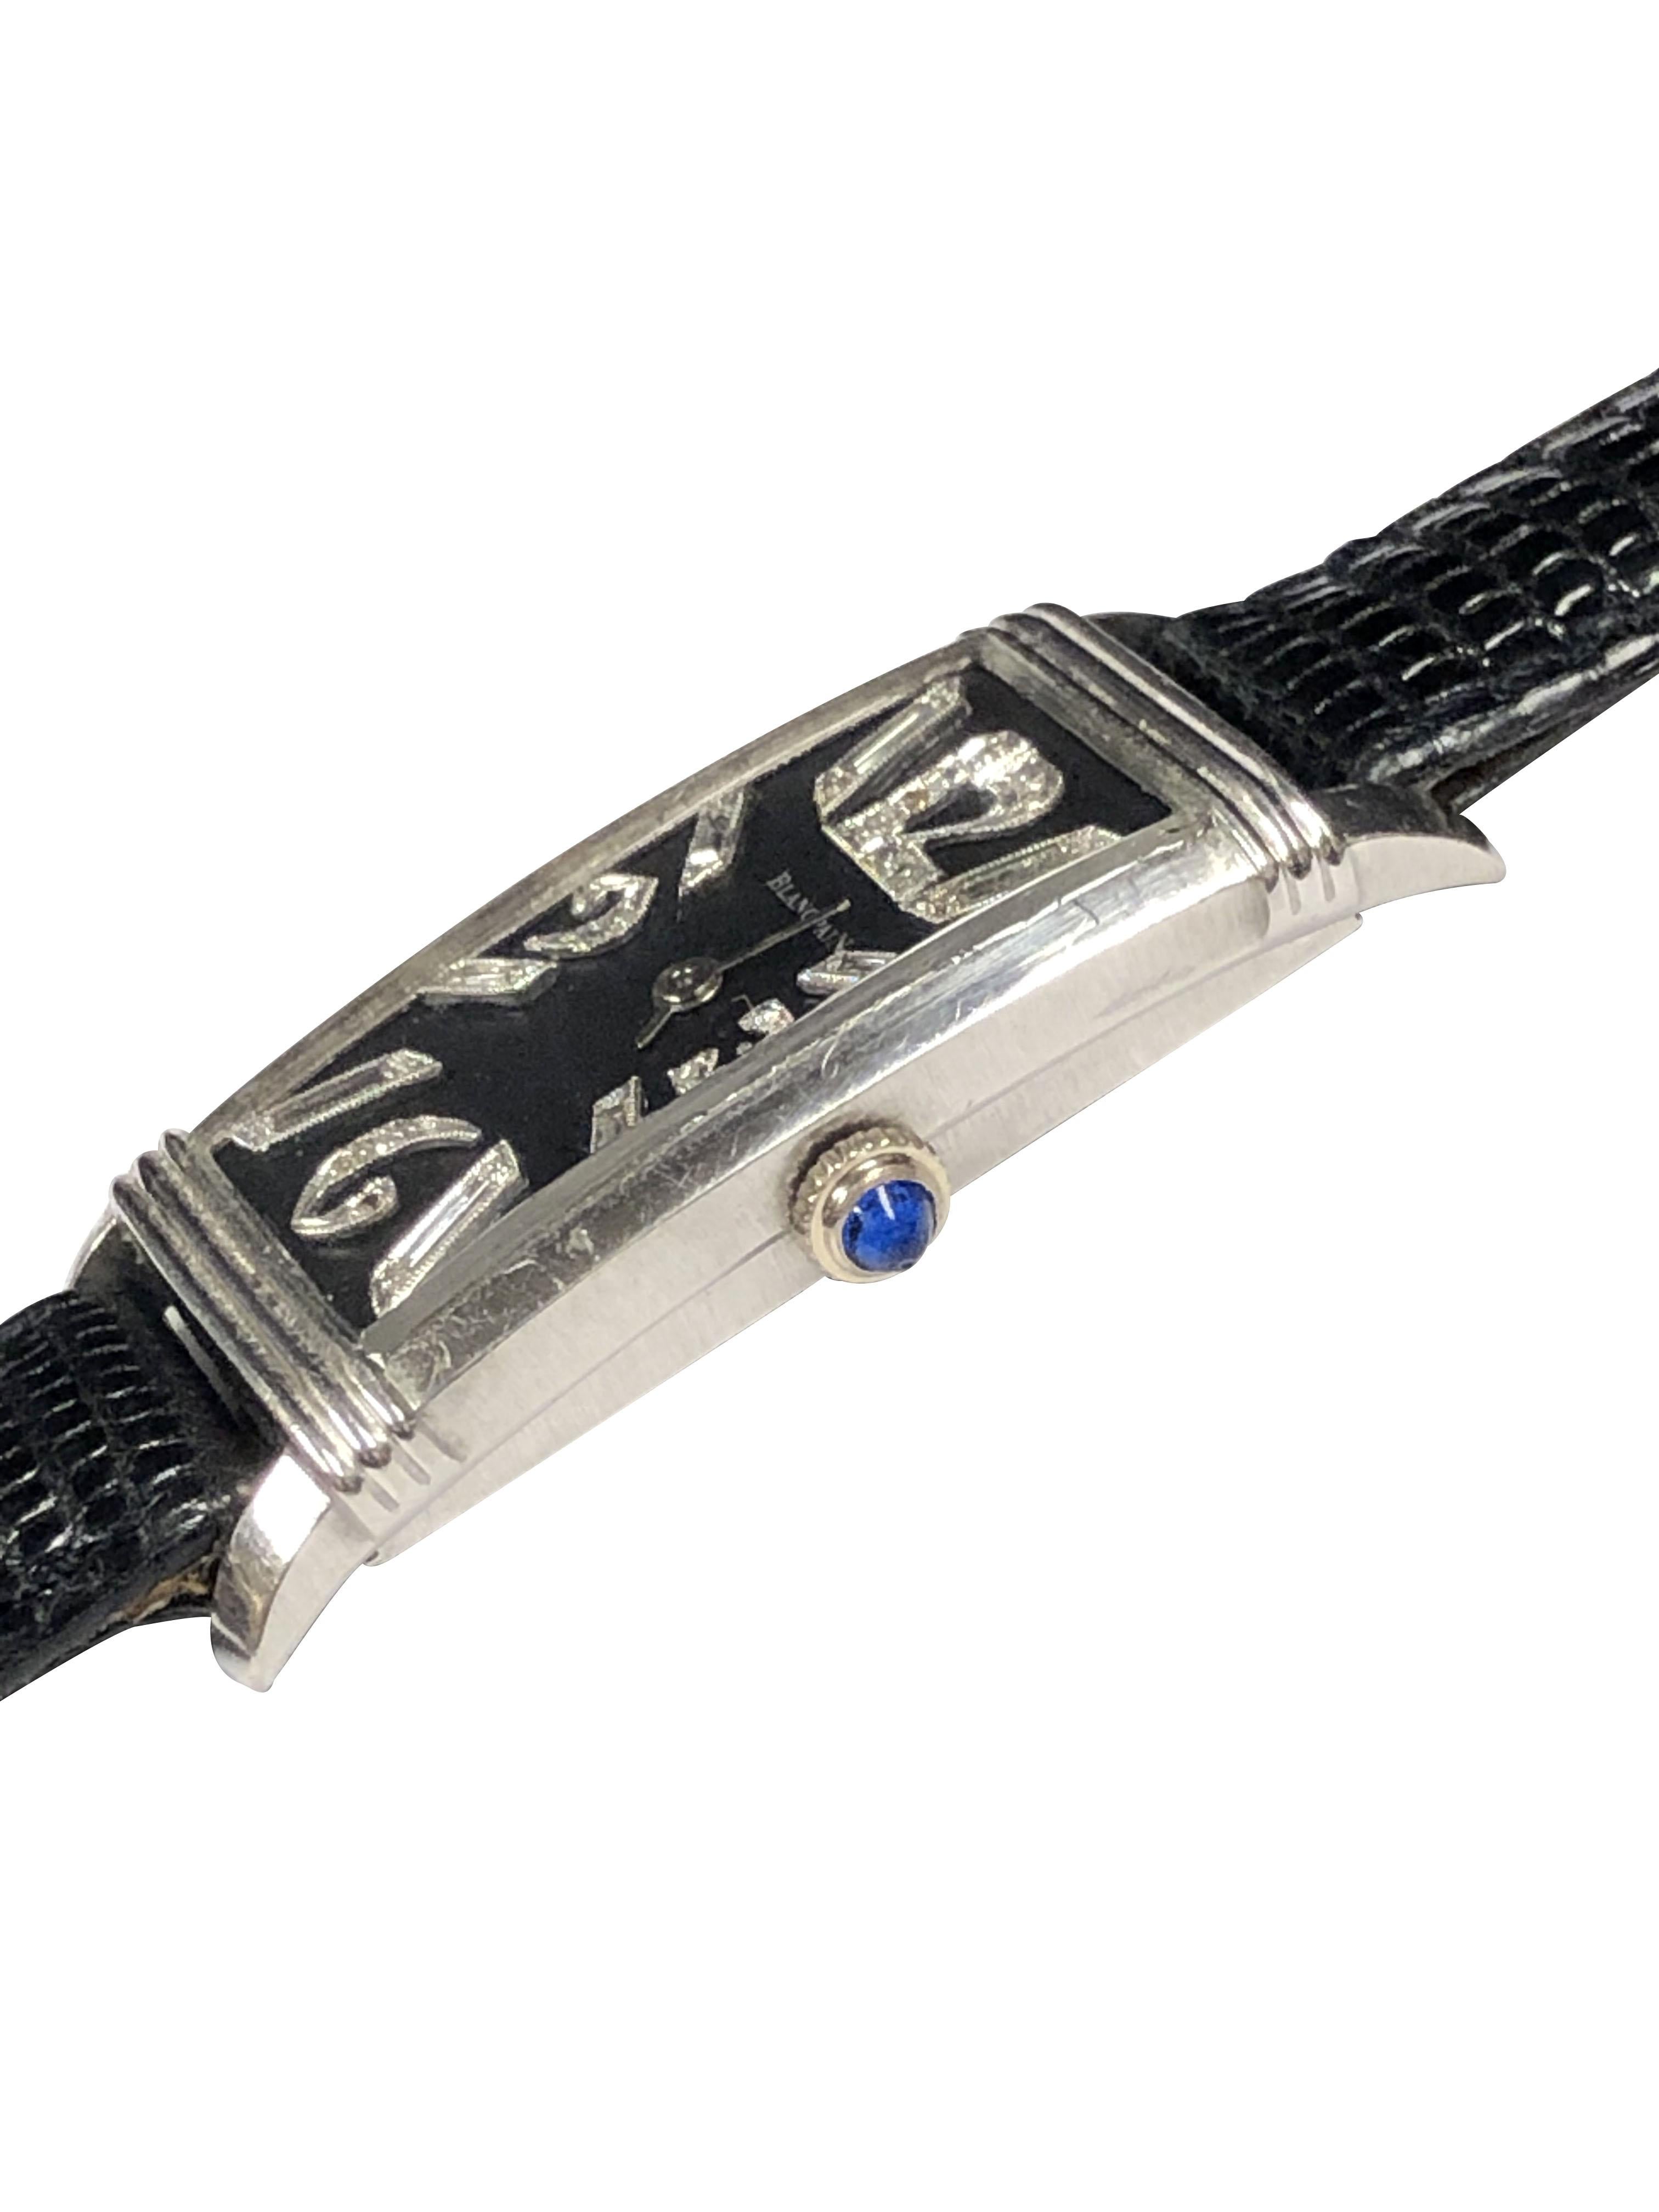 Circa 1930s Blancpain Wrist Watch, 44 M.M. ( including lugs ) X 19 M.M. Platinum 2 piece Ribbed top case, 17 Jewel Mechanical, Manual wind, Nickle Lever movement, Sapphire set crown. Black Dial with Raised Platinum and Diamond set numerals and